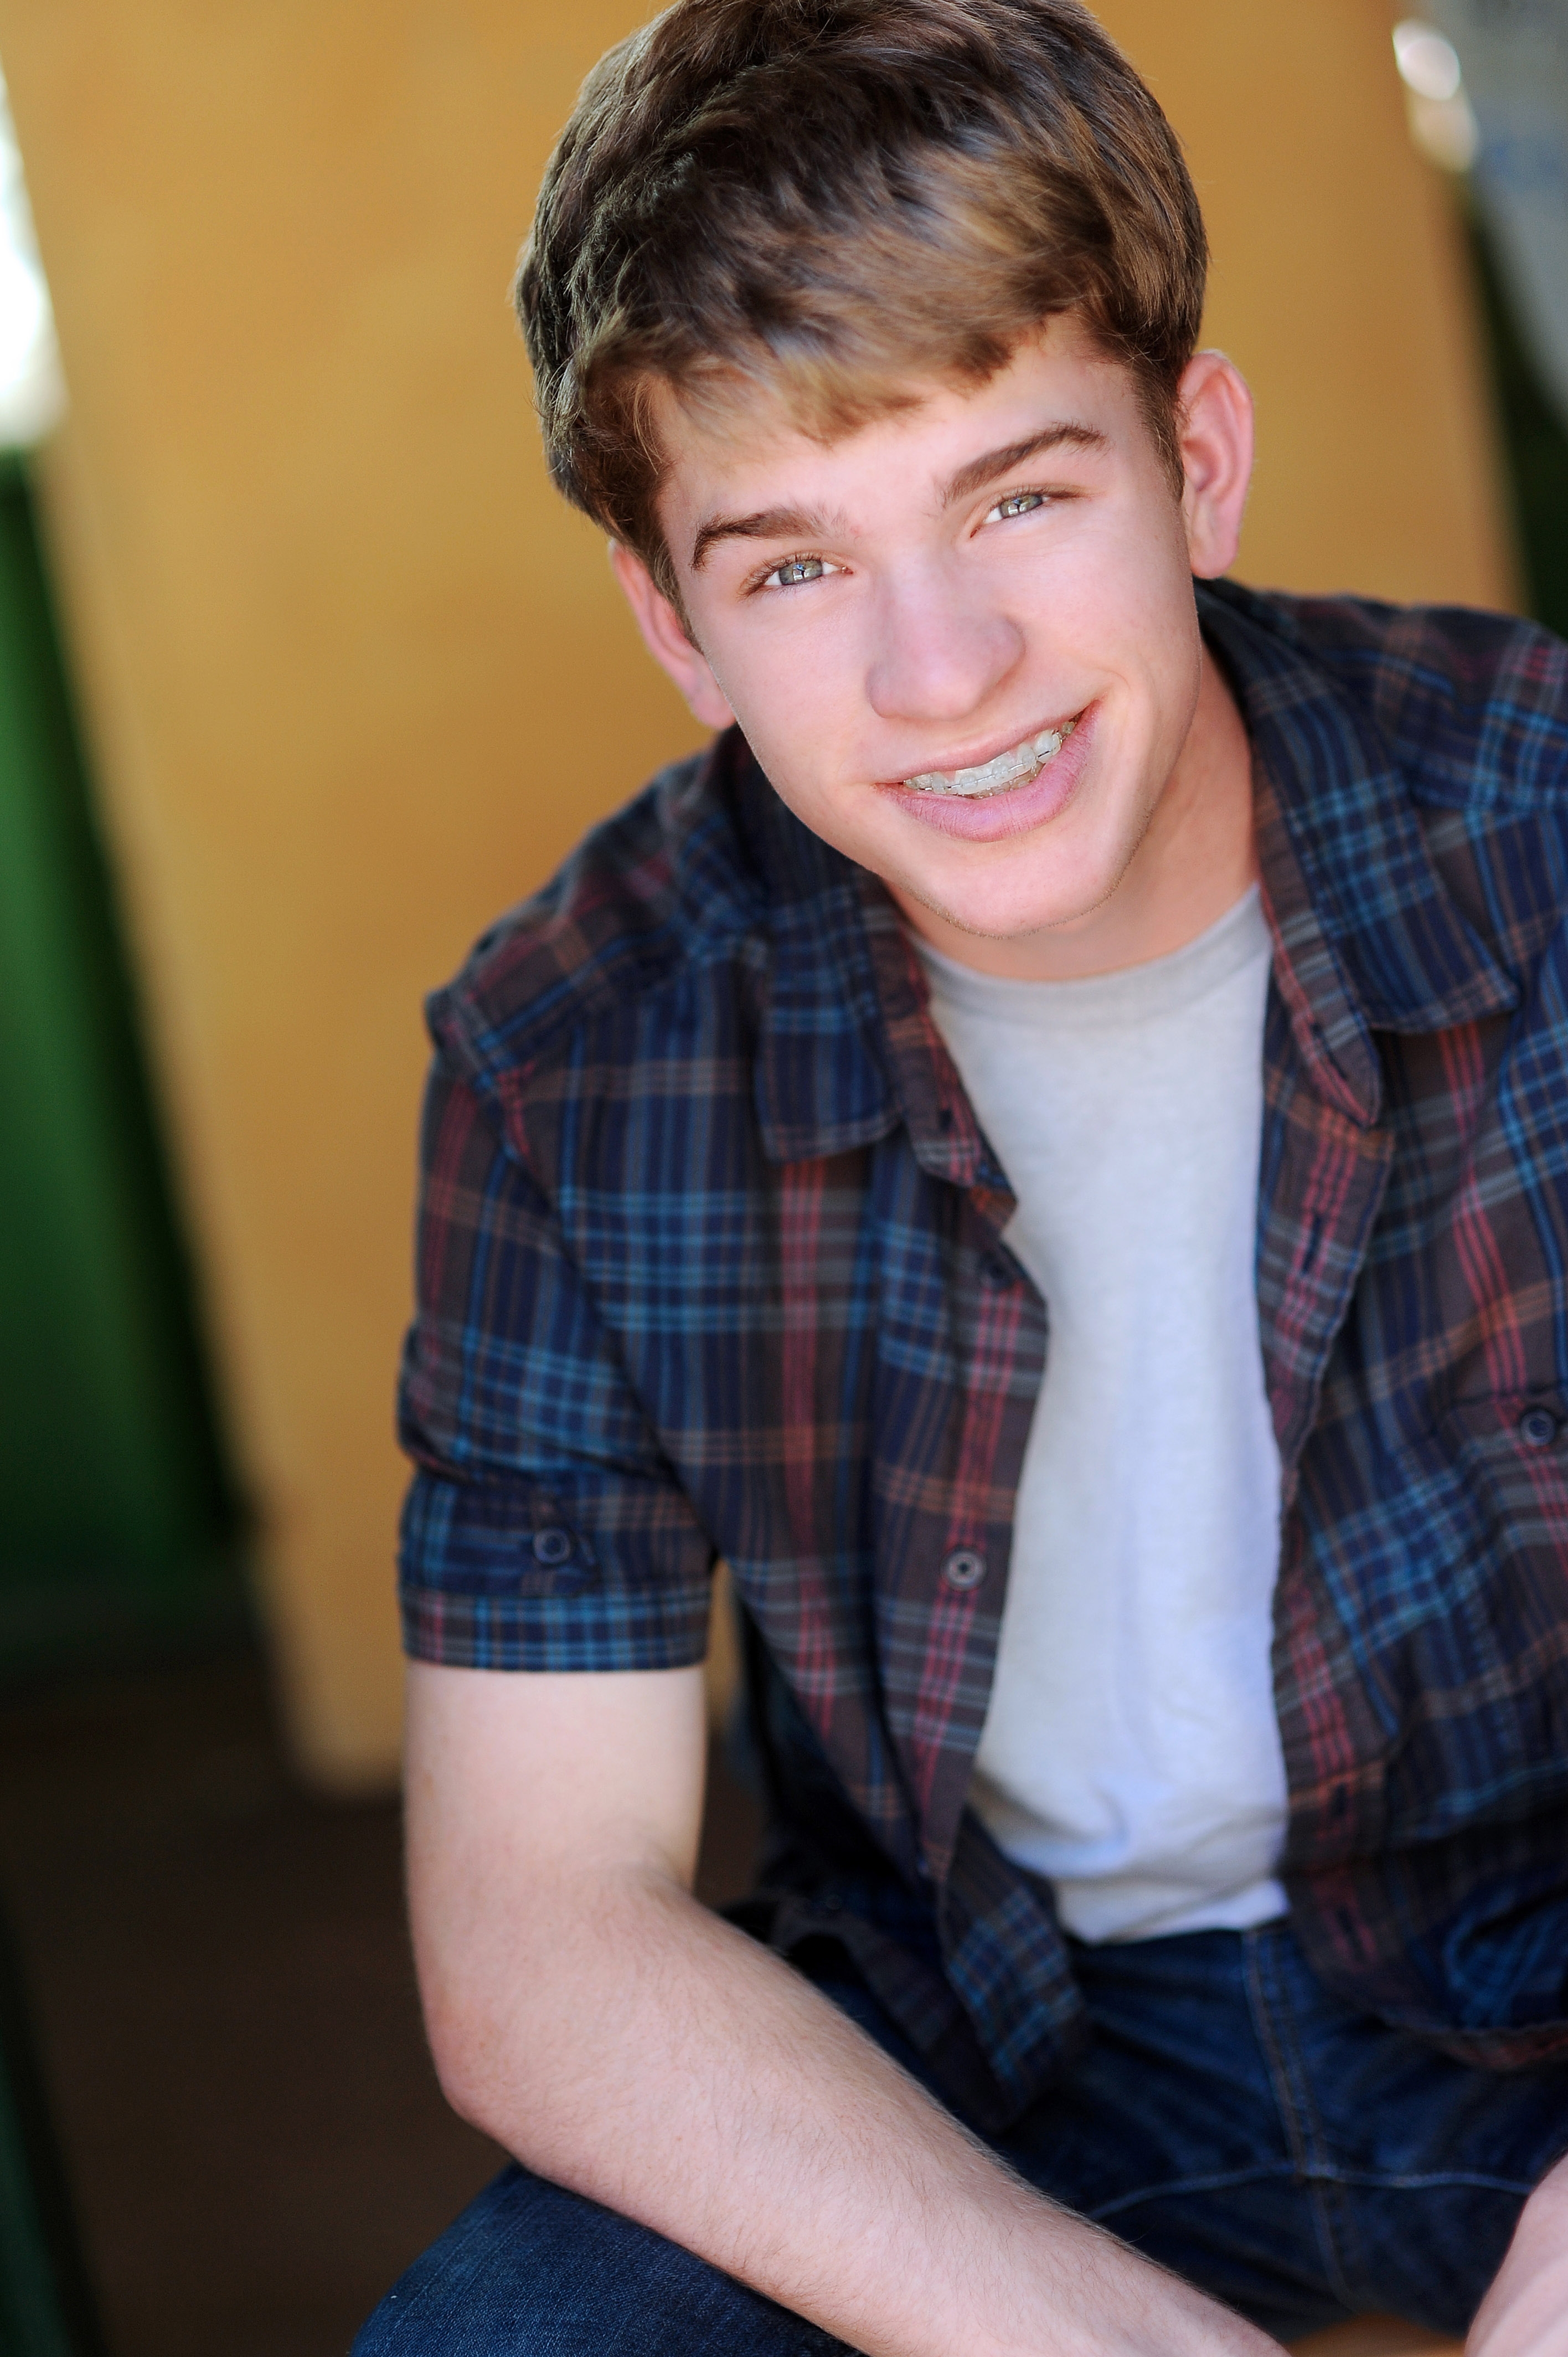 Alex Foley Youth Talent Connection 17332 Irvine Blvd. #230 Tustin, CA 92780 Casting Cell: 714-315-8546 Heather Baldwin - agent